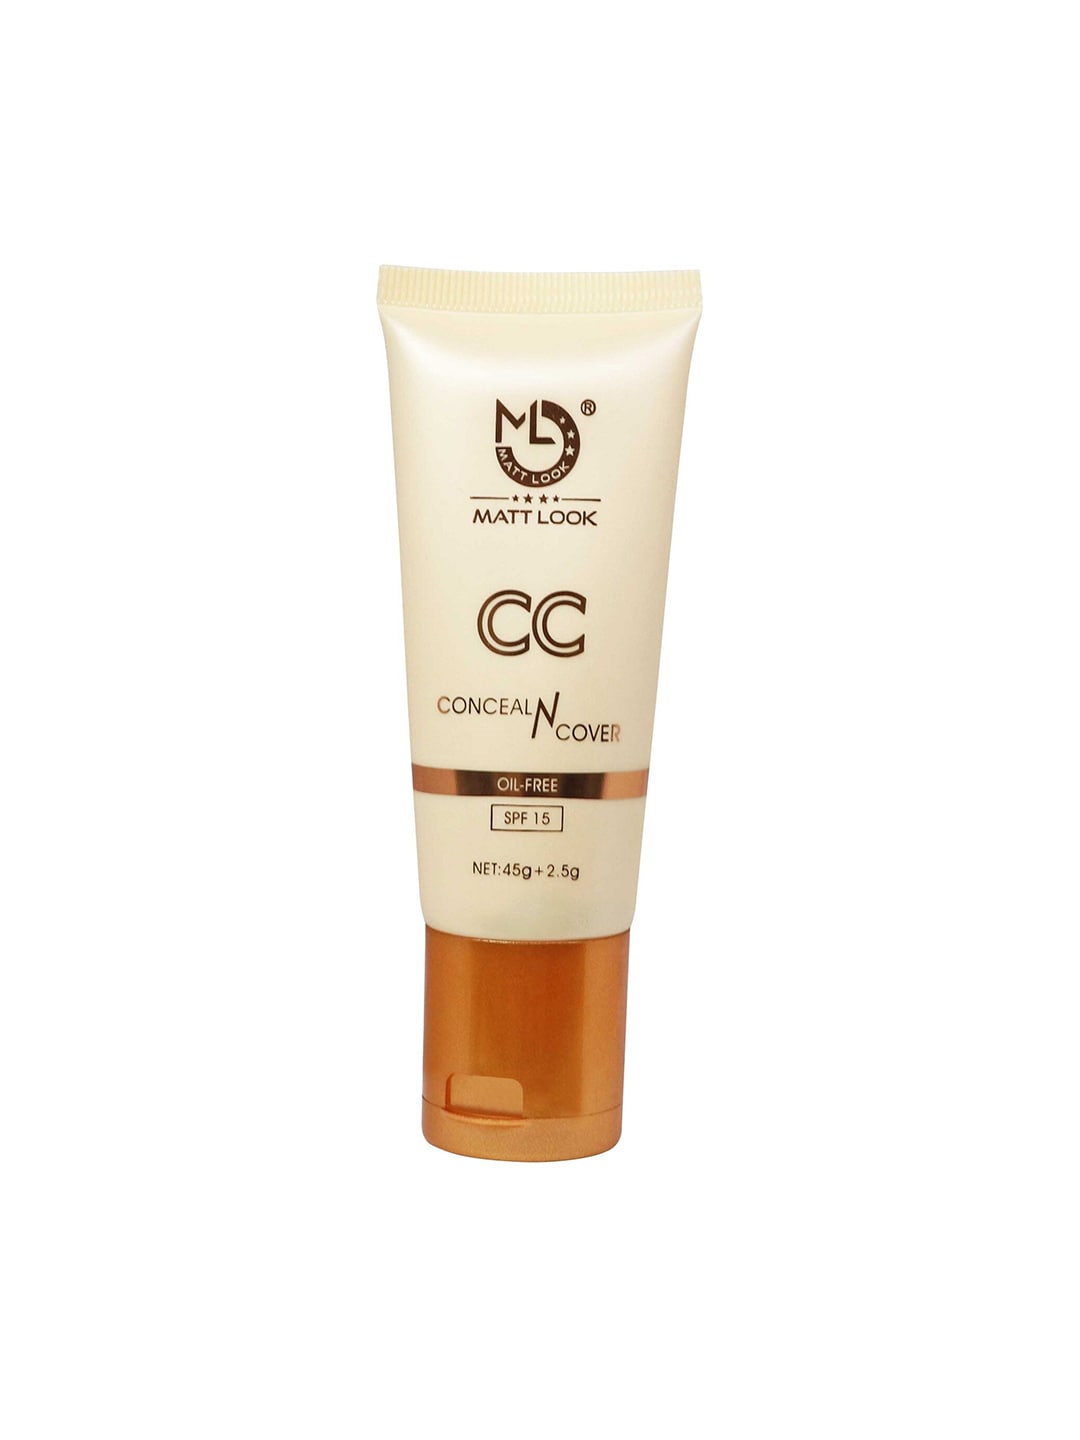 MATTLOOK CC Conceal N Cover Oil-Free SPF-15 Light - 45 gm & 2.5 gm Price in India